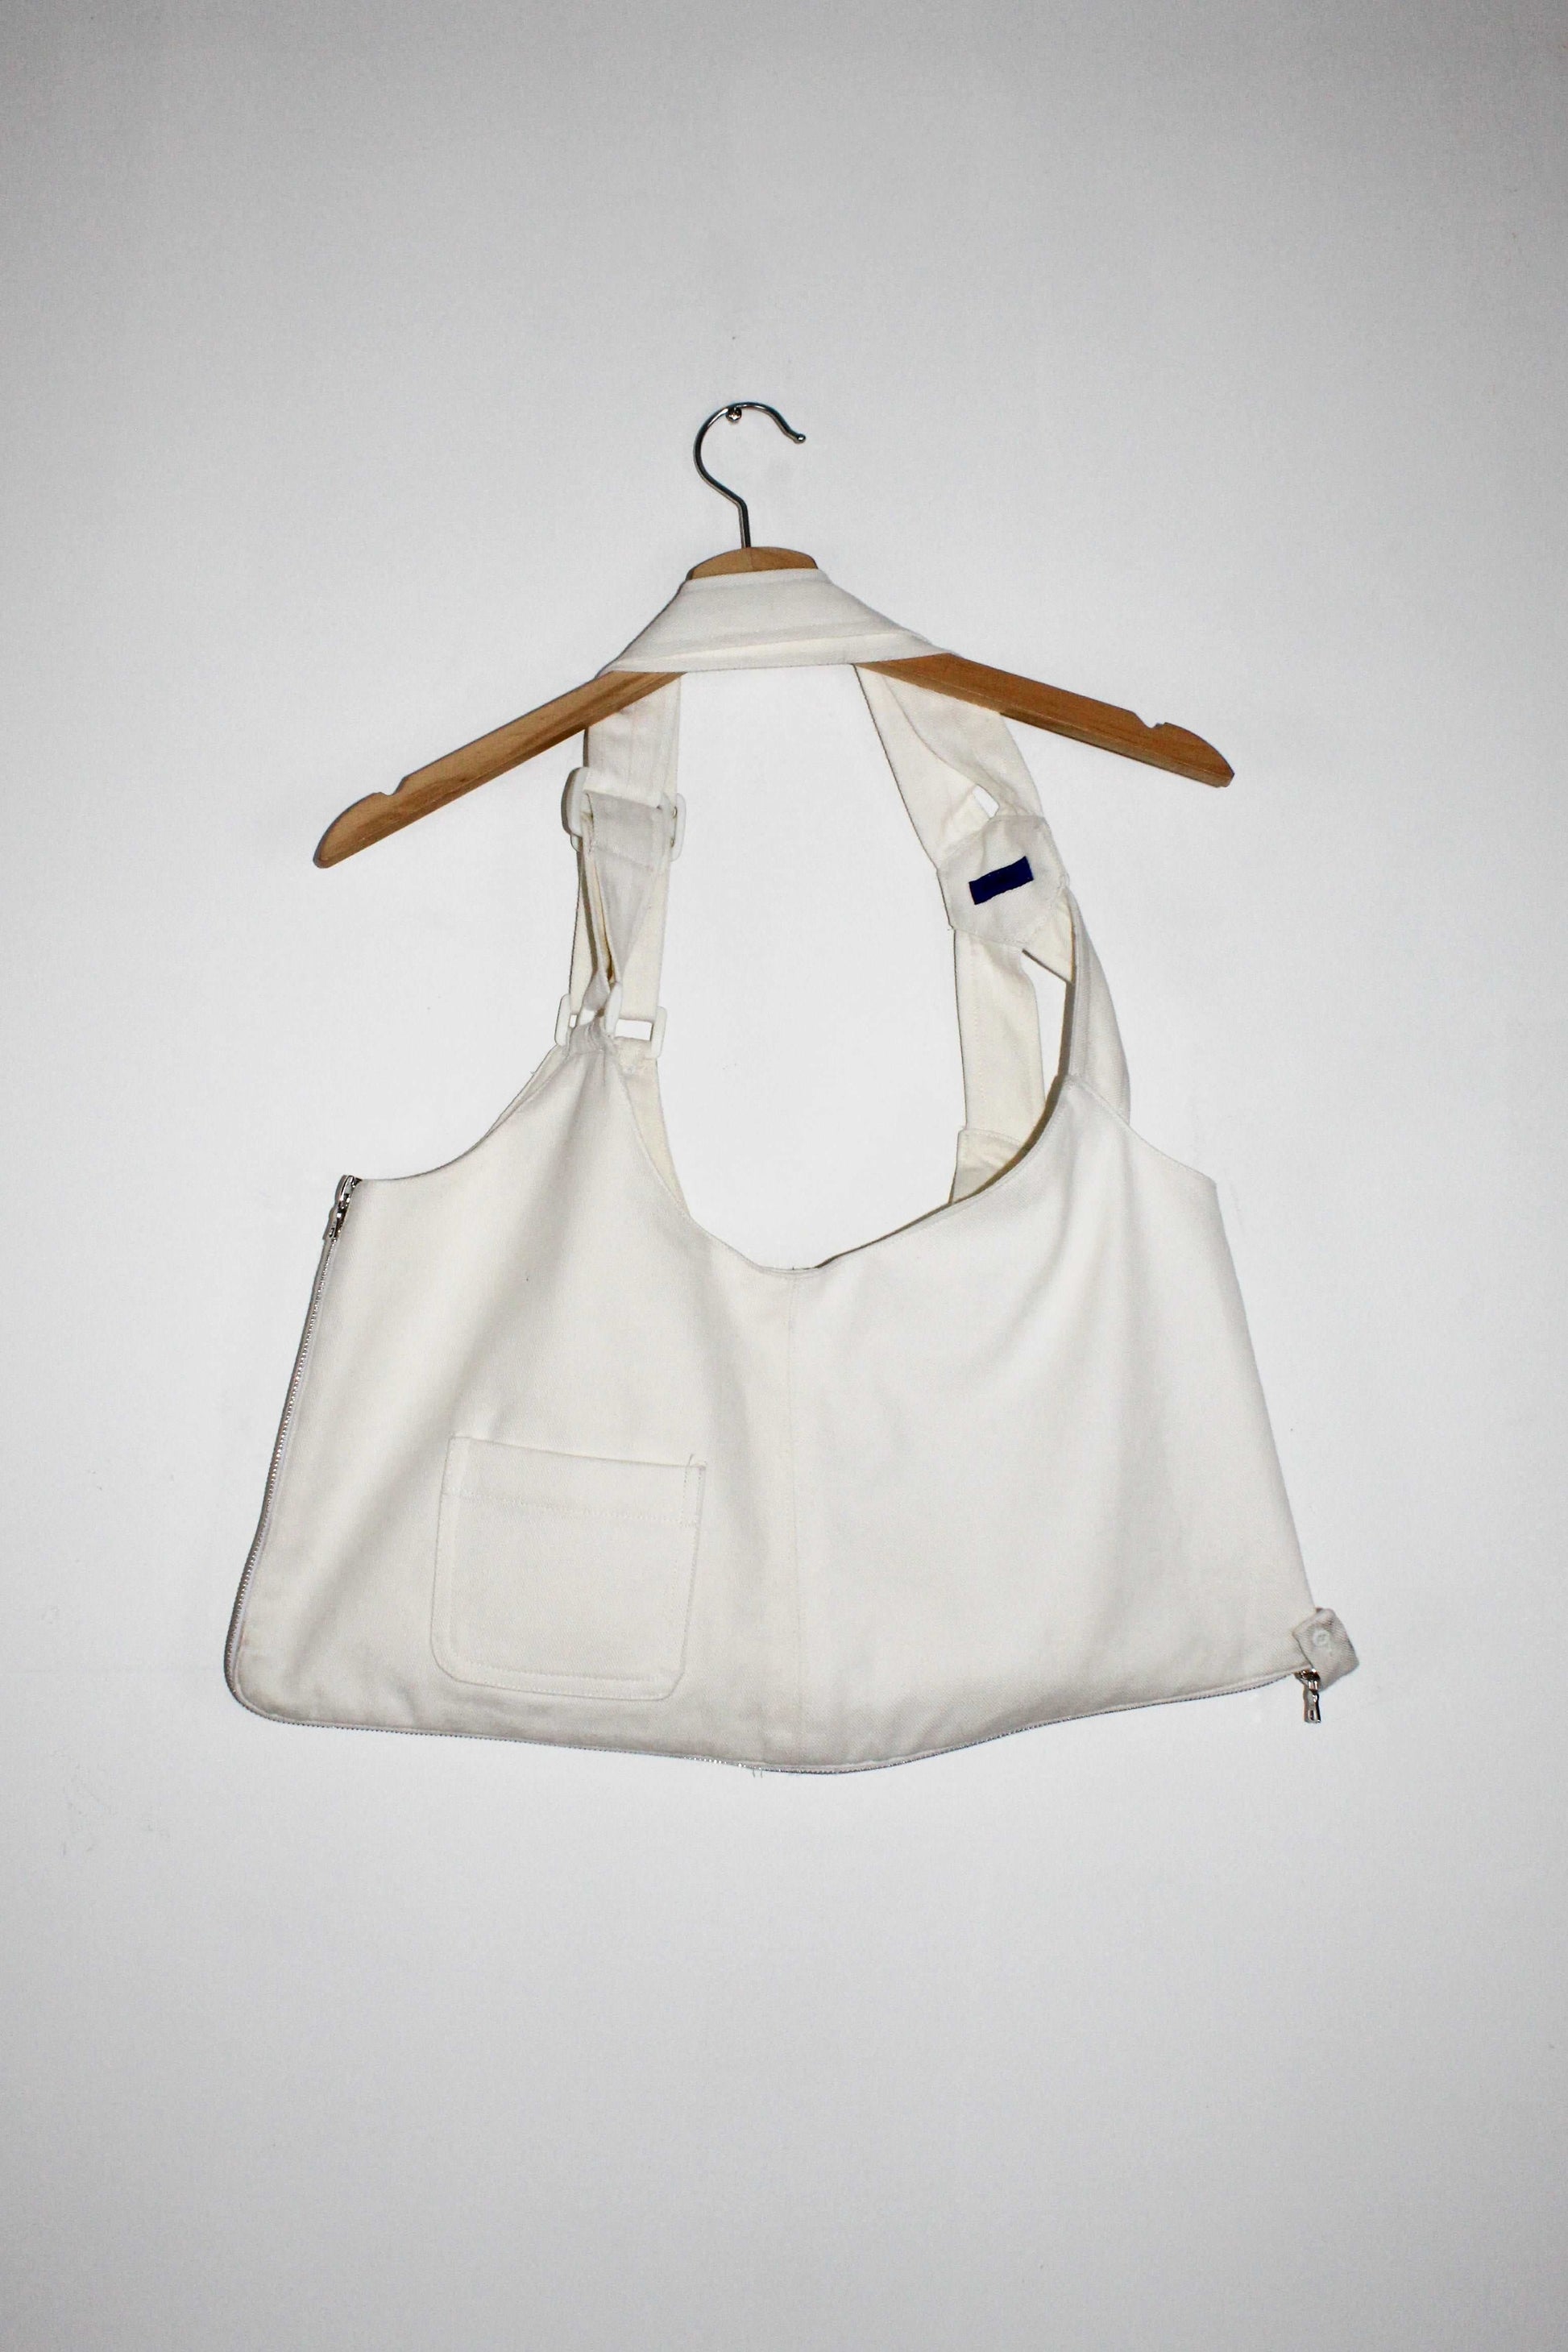 bag view white denim cropped adjustable strap convertible vest bag with cargo pockets